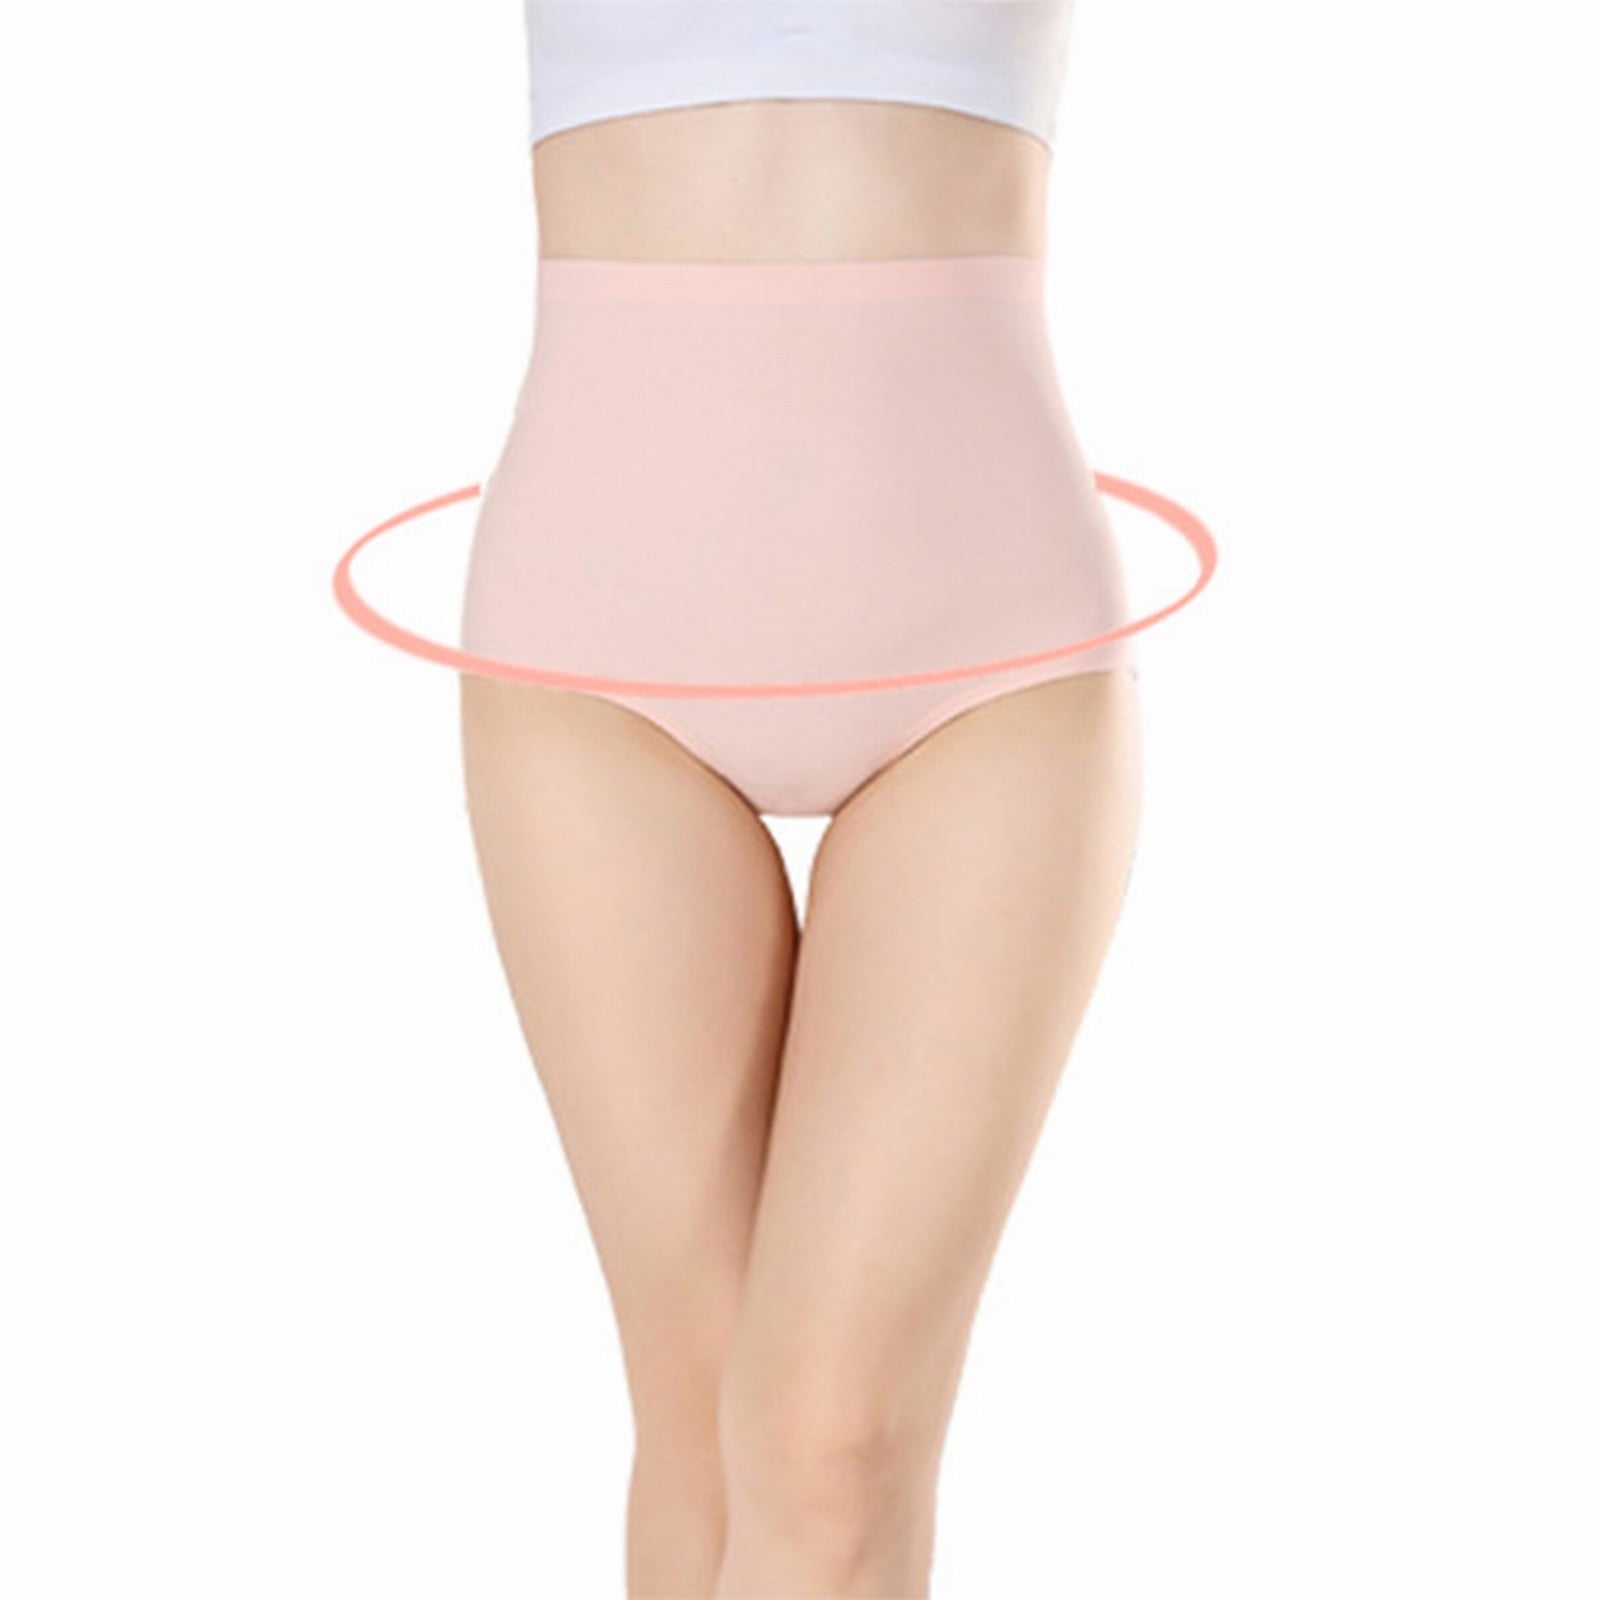 adviicd Panties for Women Pack Tummy Control Women's Disposable